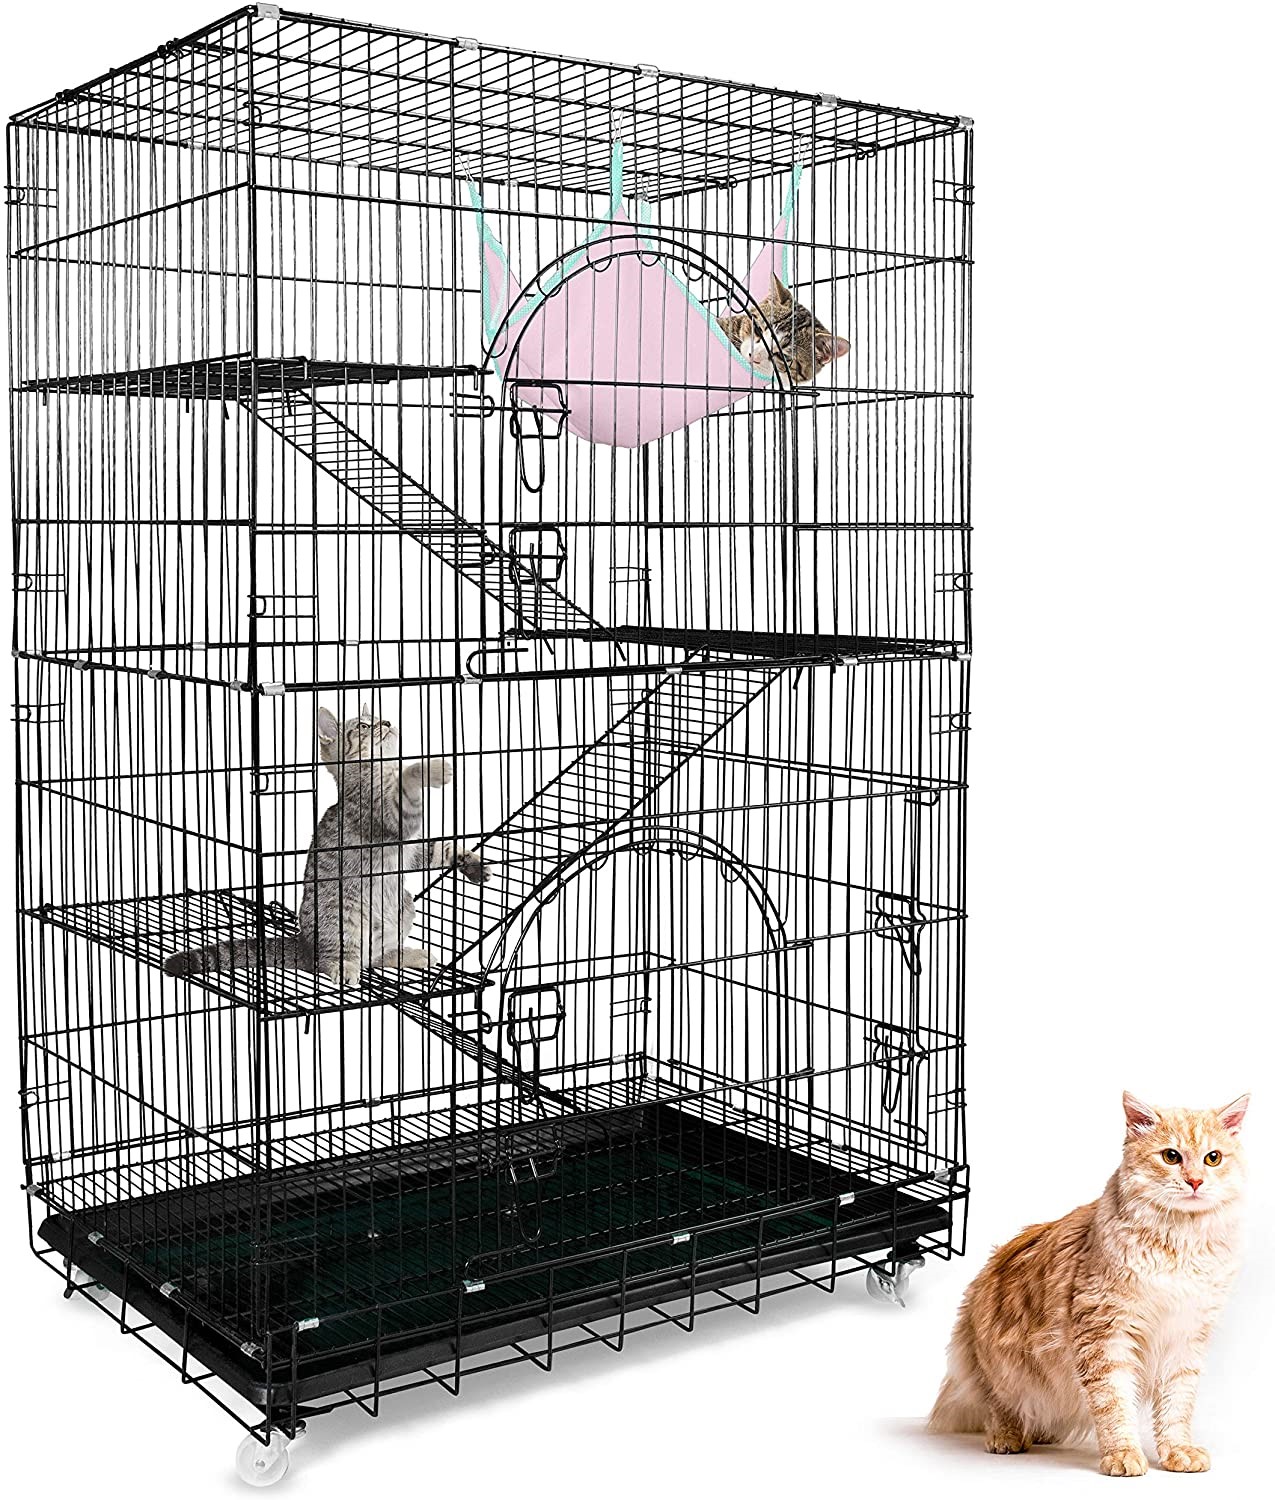 How to Choose Cat Cages and Playpens